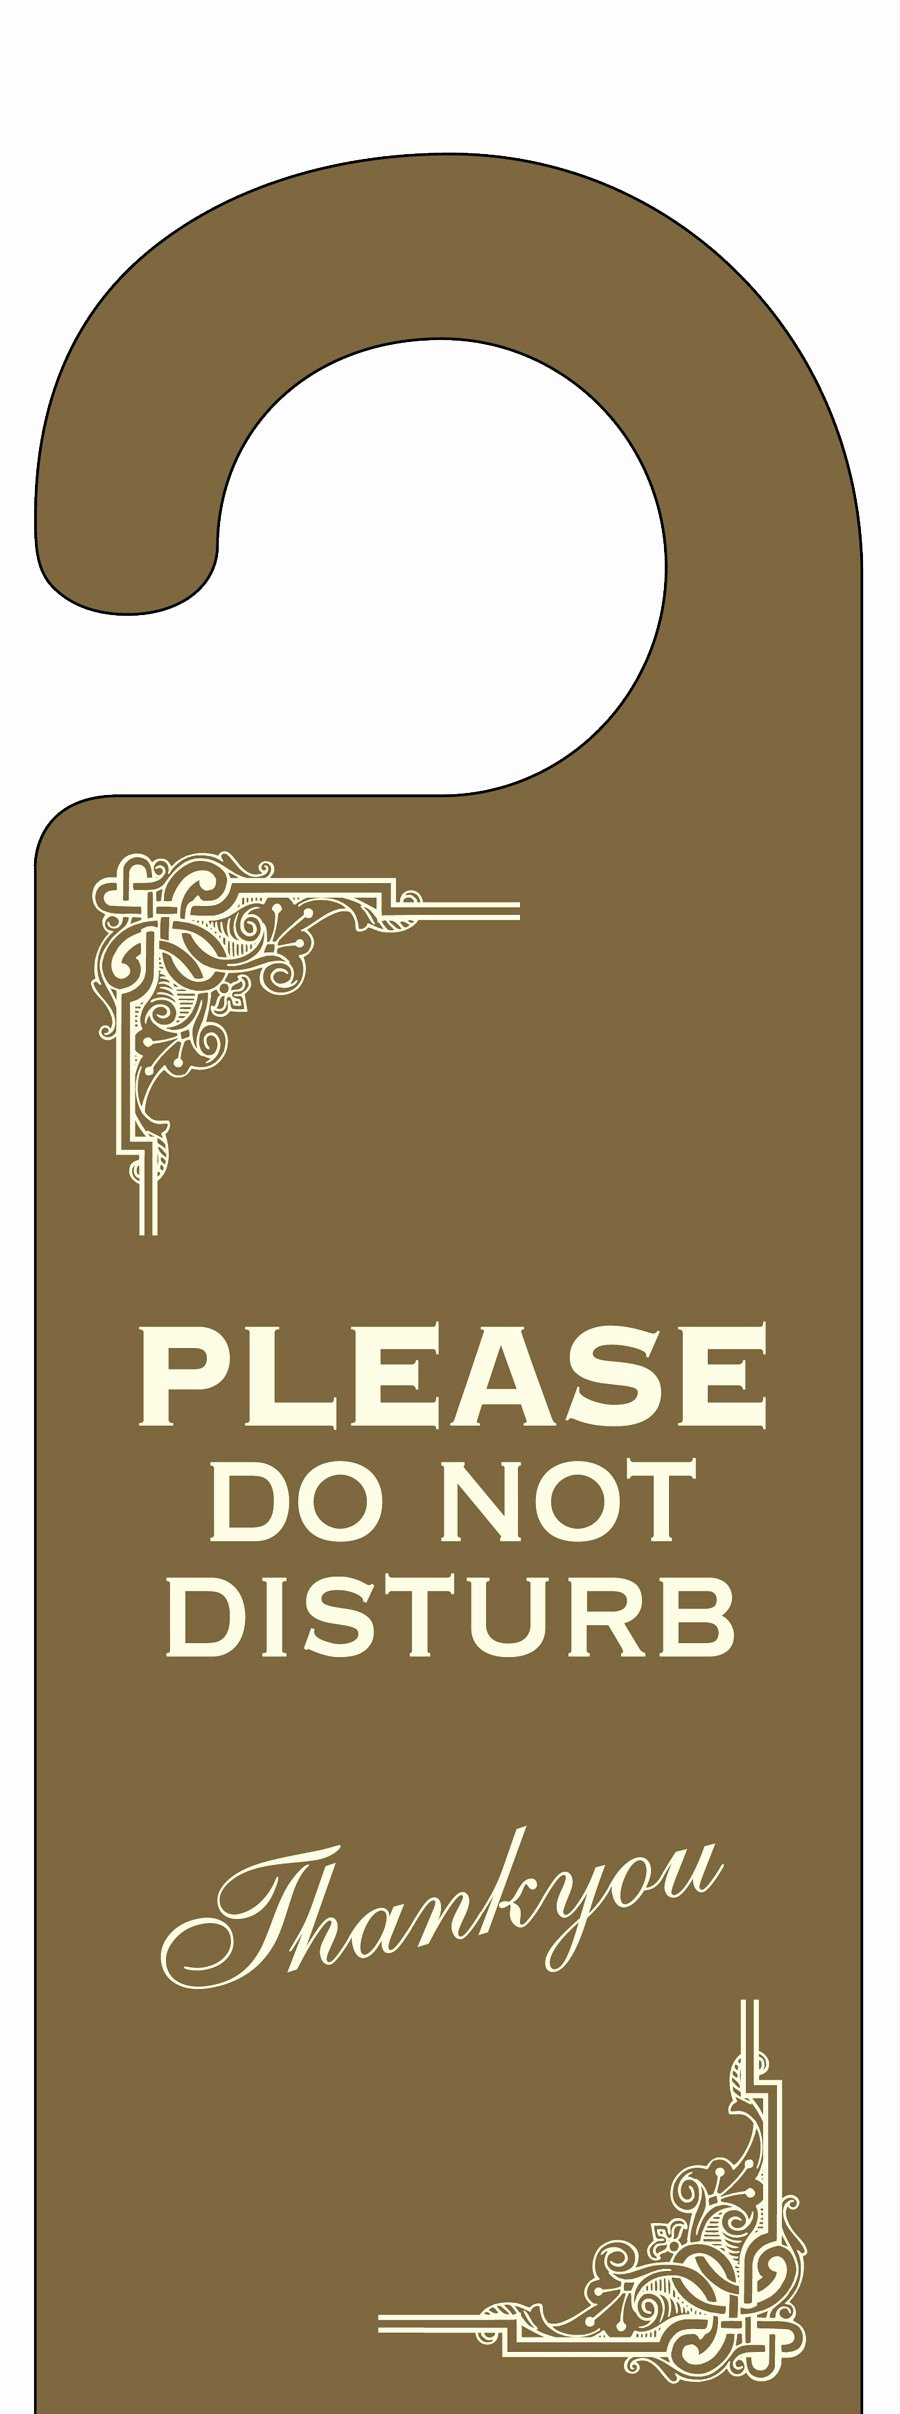 Do Not Disturb Signs Template Elegant 1000 Images About St Paddy S Day On Pinterest